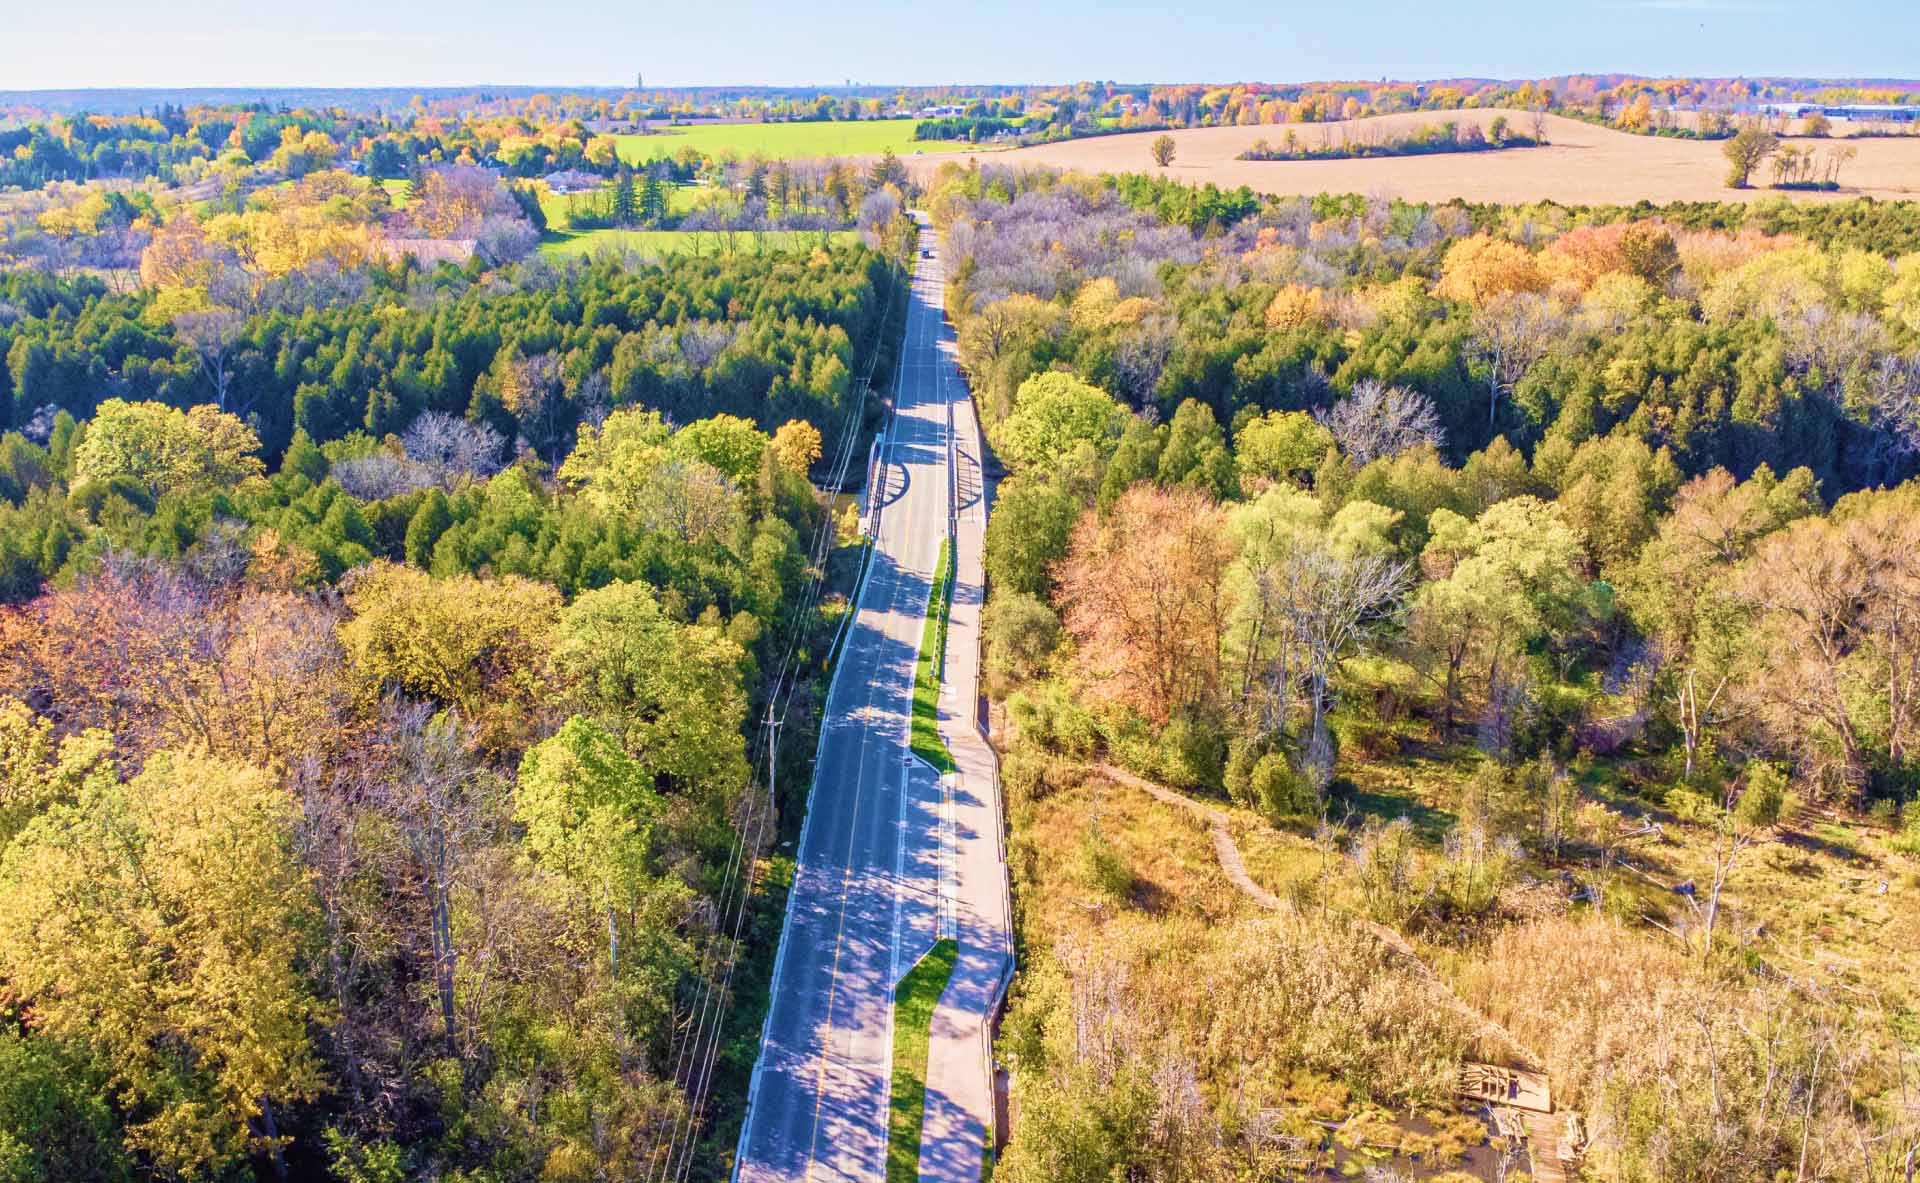 Highway running through a forested region